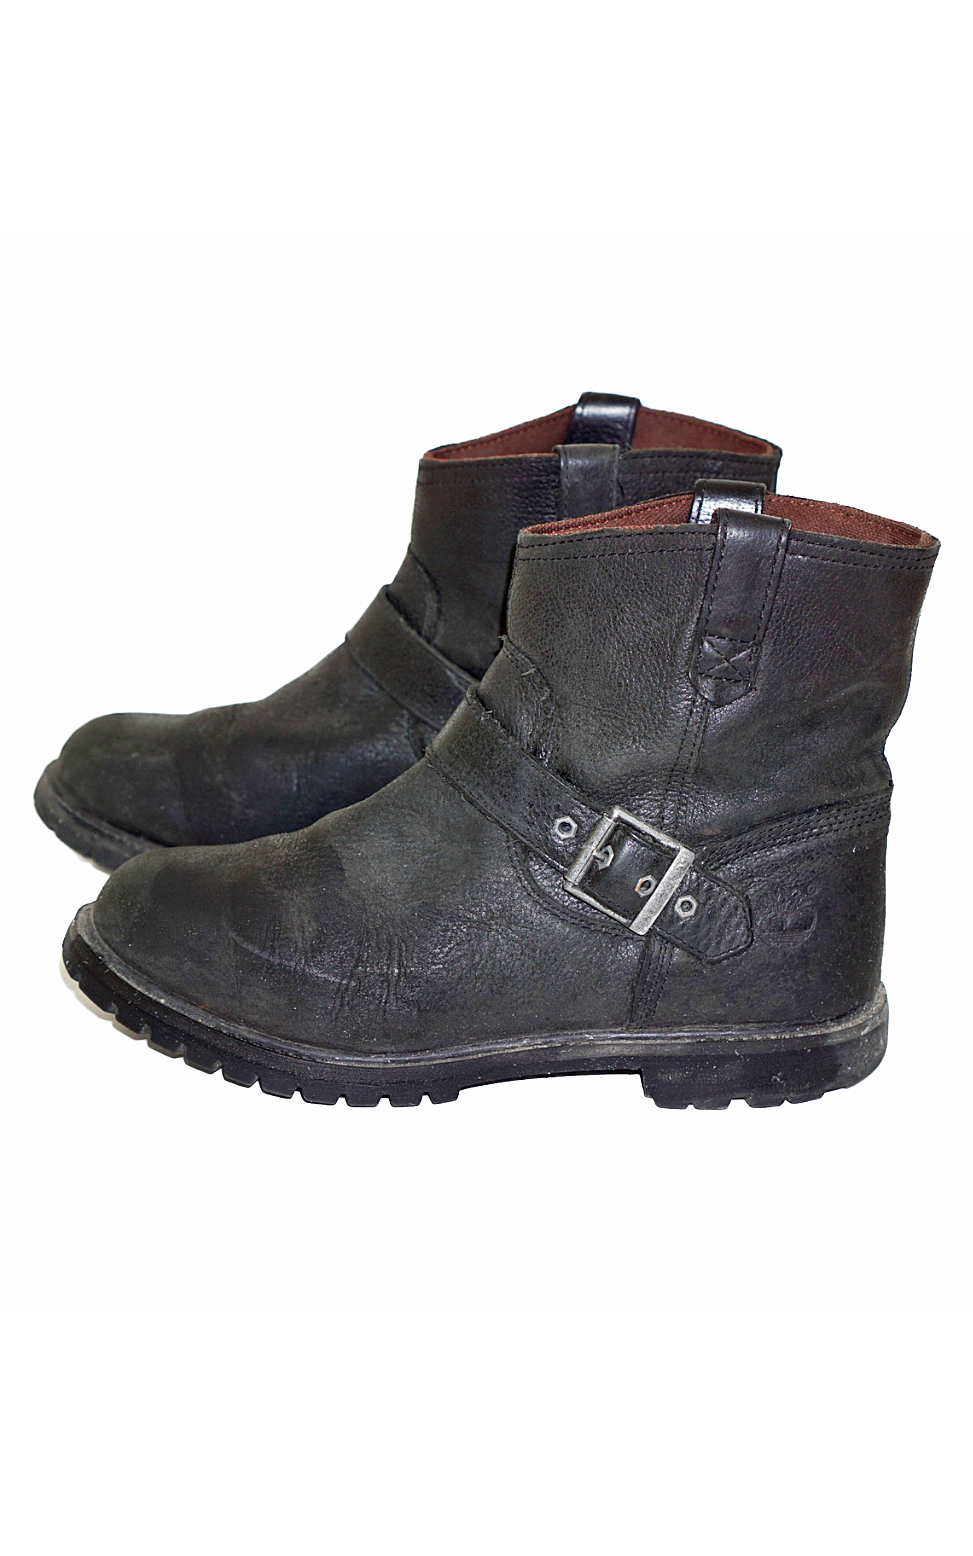 TIMBERLAND Moto Biker Ankle Black Leather Boots resellum